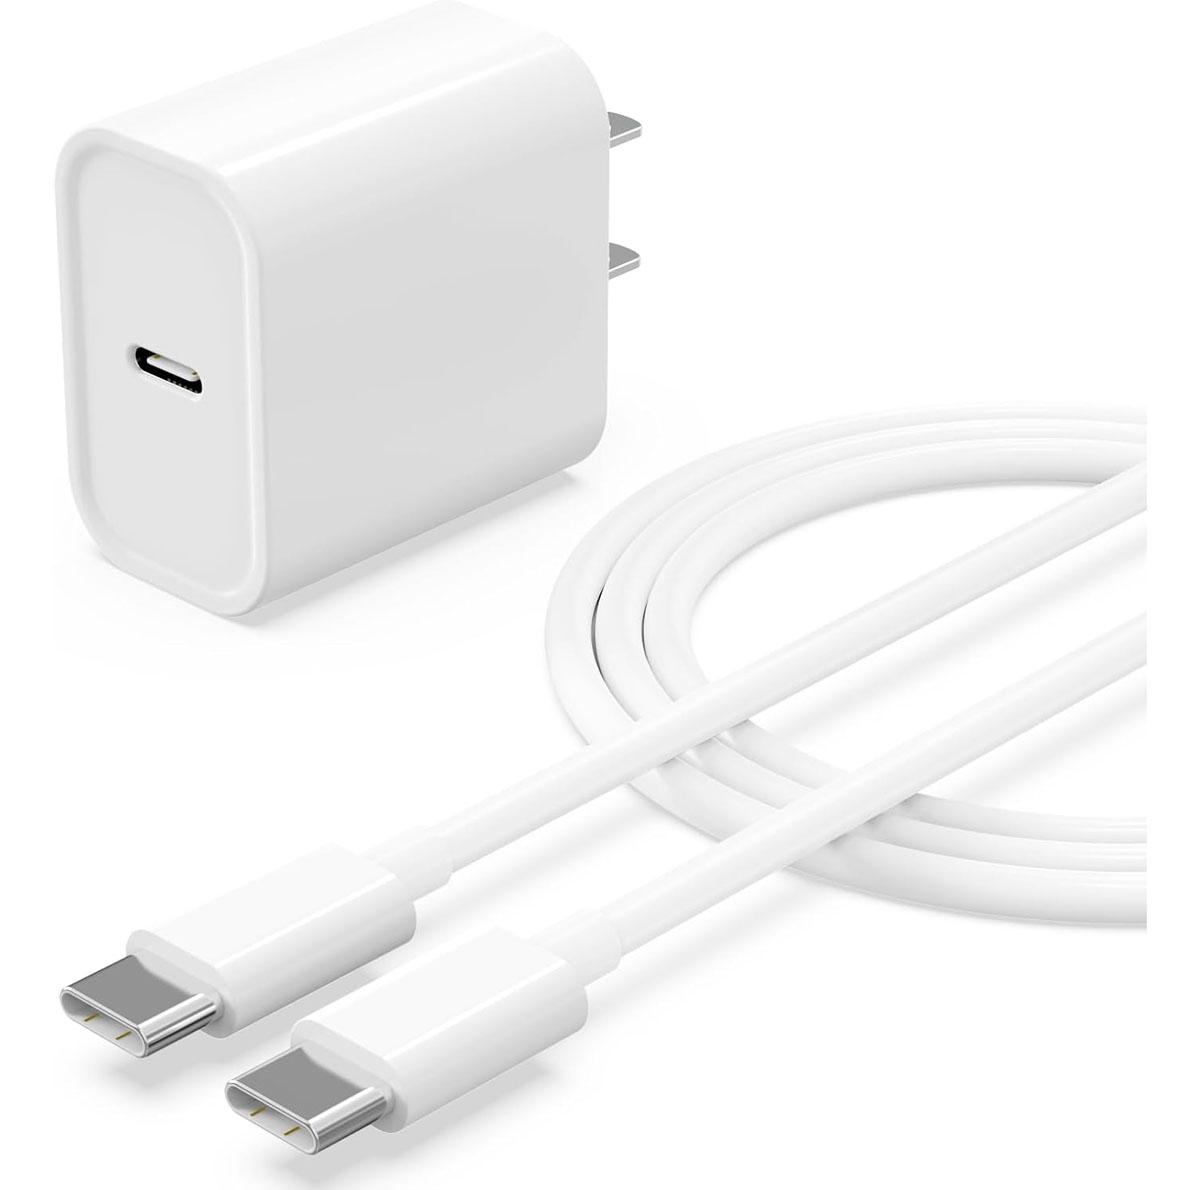 USB-C Charging Block and 6ft USB-C Cable for $3.99